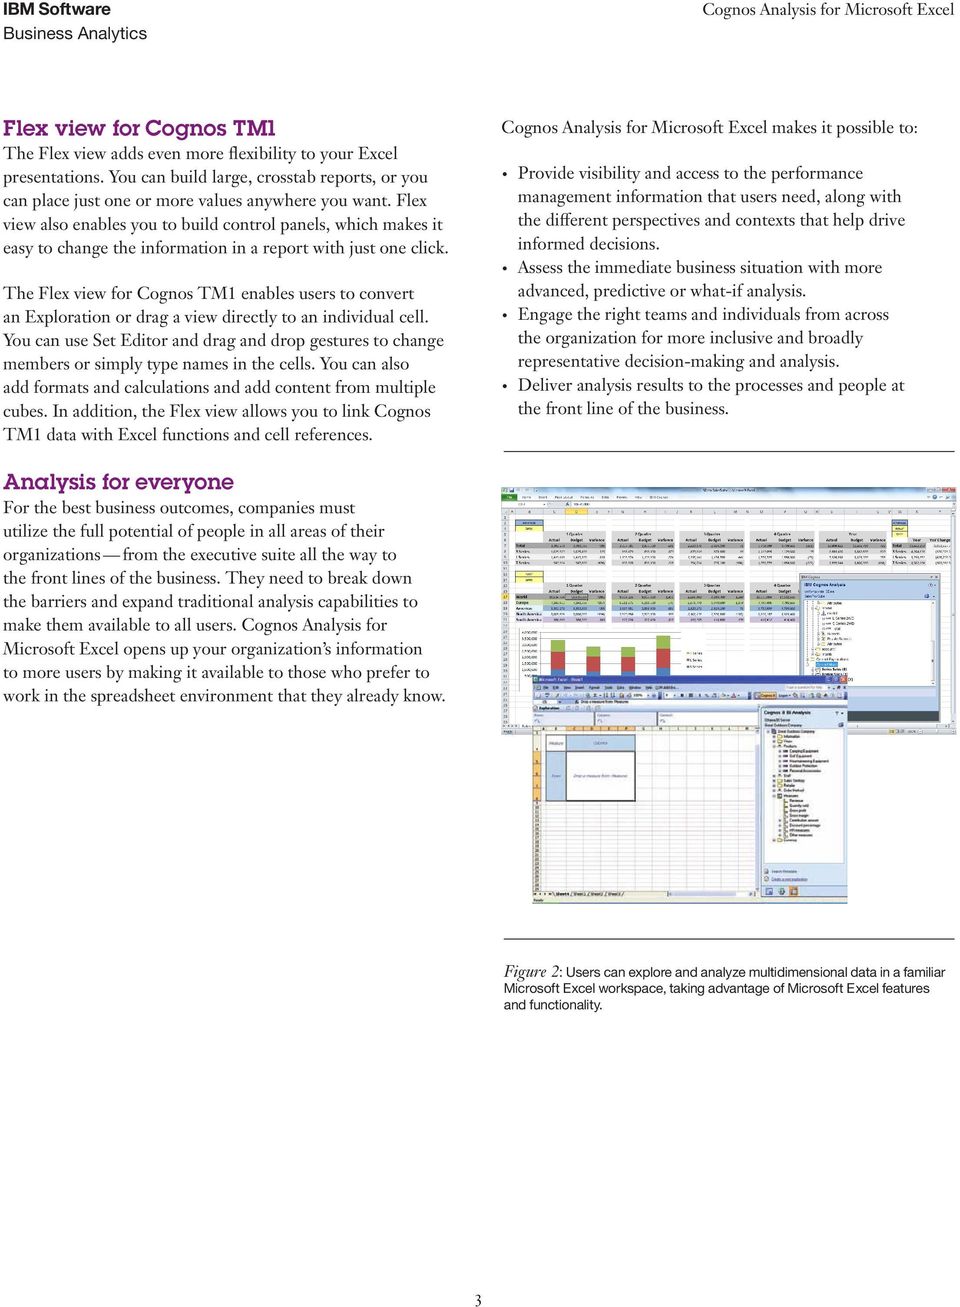 The Flex view for Cognos TM1 enables users to convert an Exploration or drag a view directly to an individual cell.